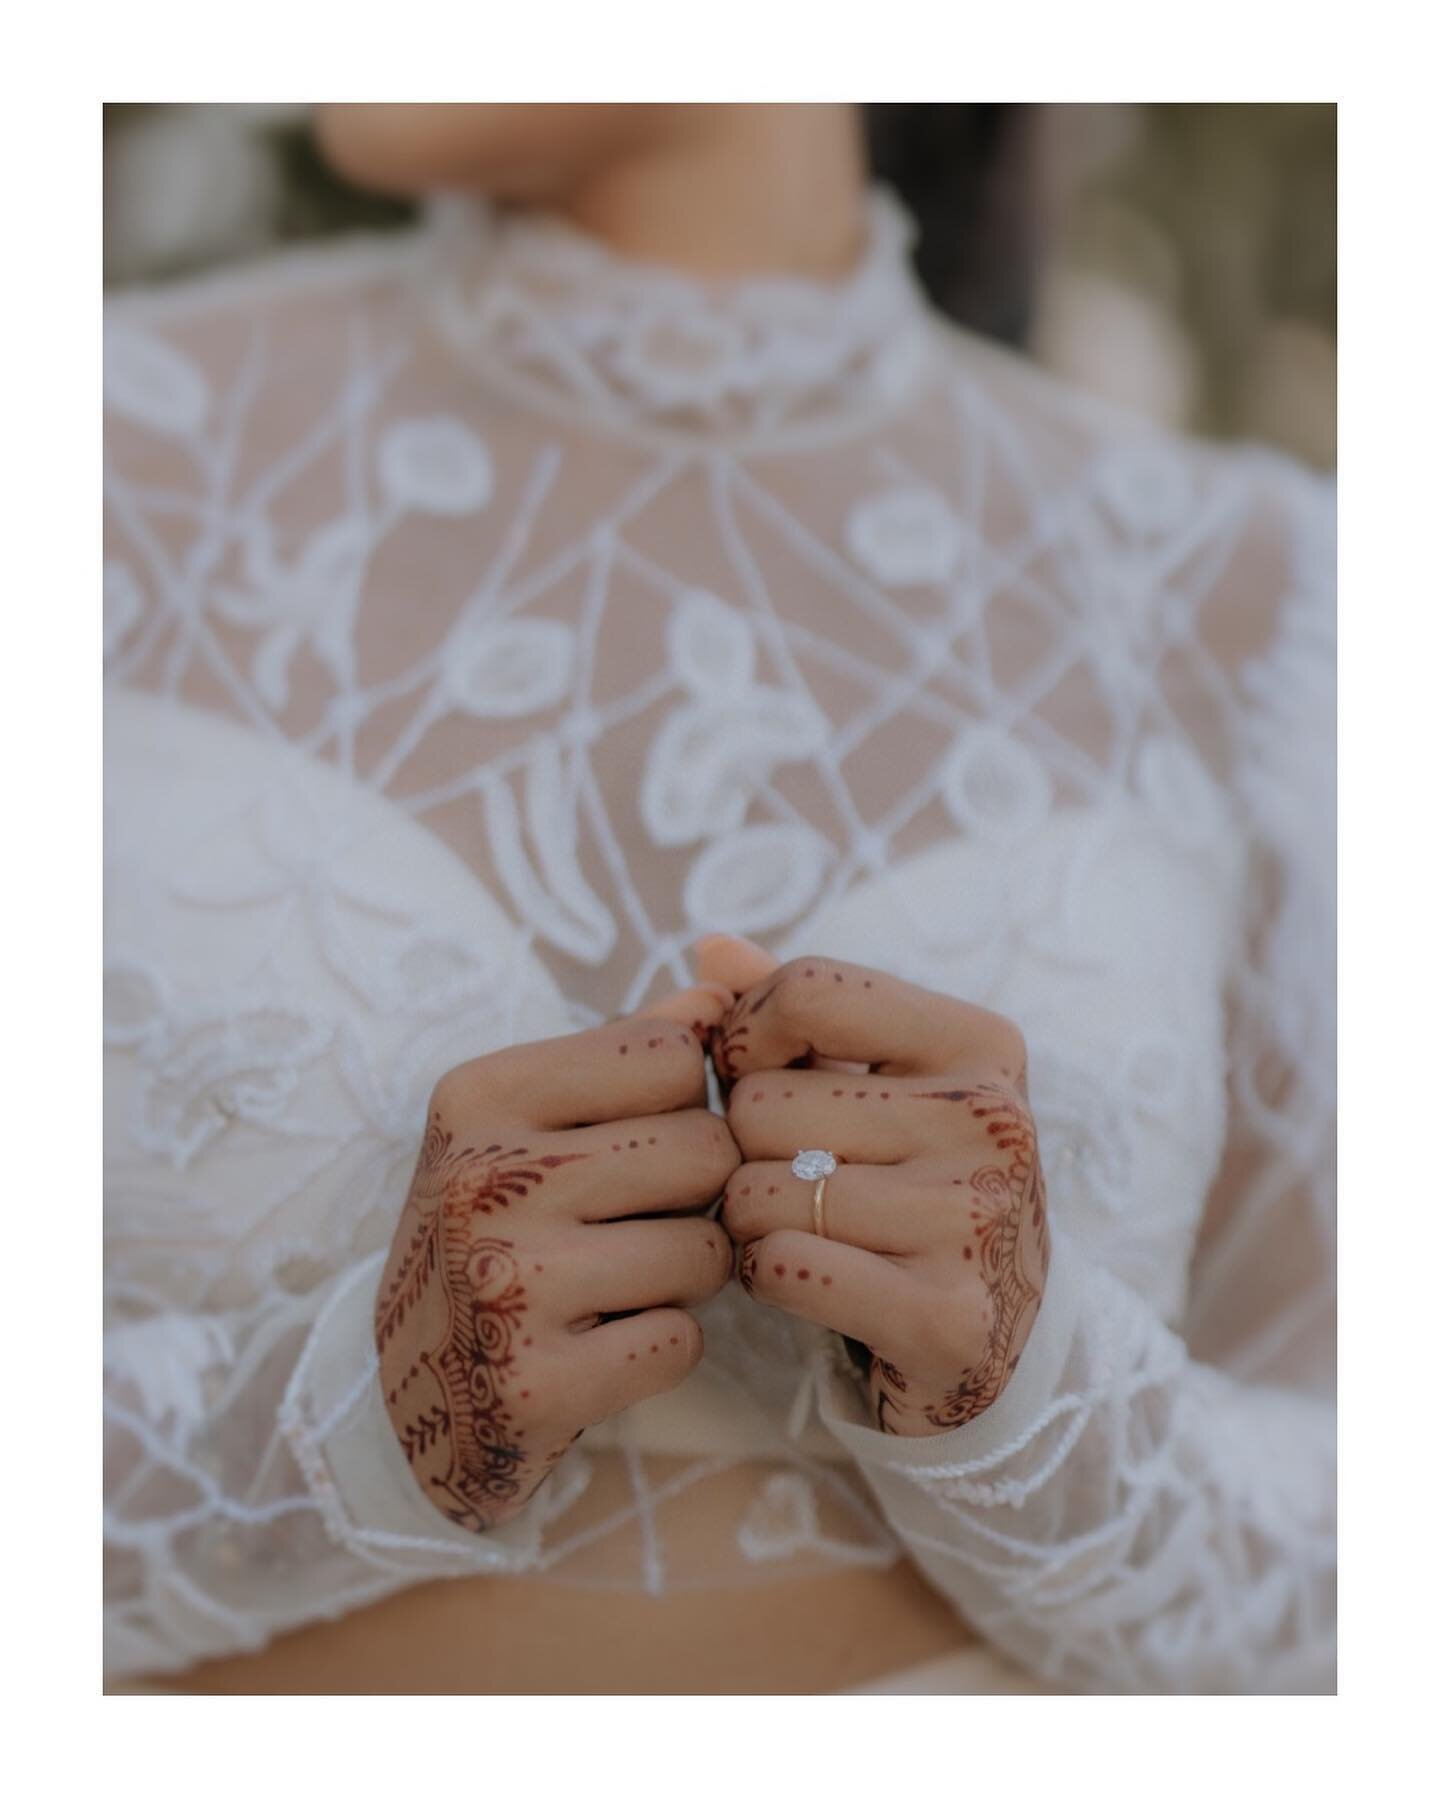 Jayna &amp; Himesh 

Sometimes we need to stop and remember all the emotions that we live this year side by side with our couples. We pass three amazing days with Janyna &amp; Himesh and we are so grateful. ❤️

WP @ouiloveyou_weddings 

#lisbonphotog